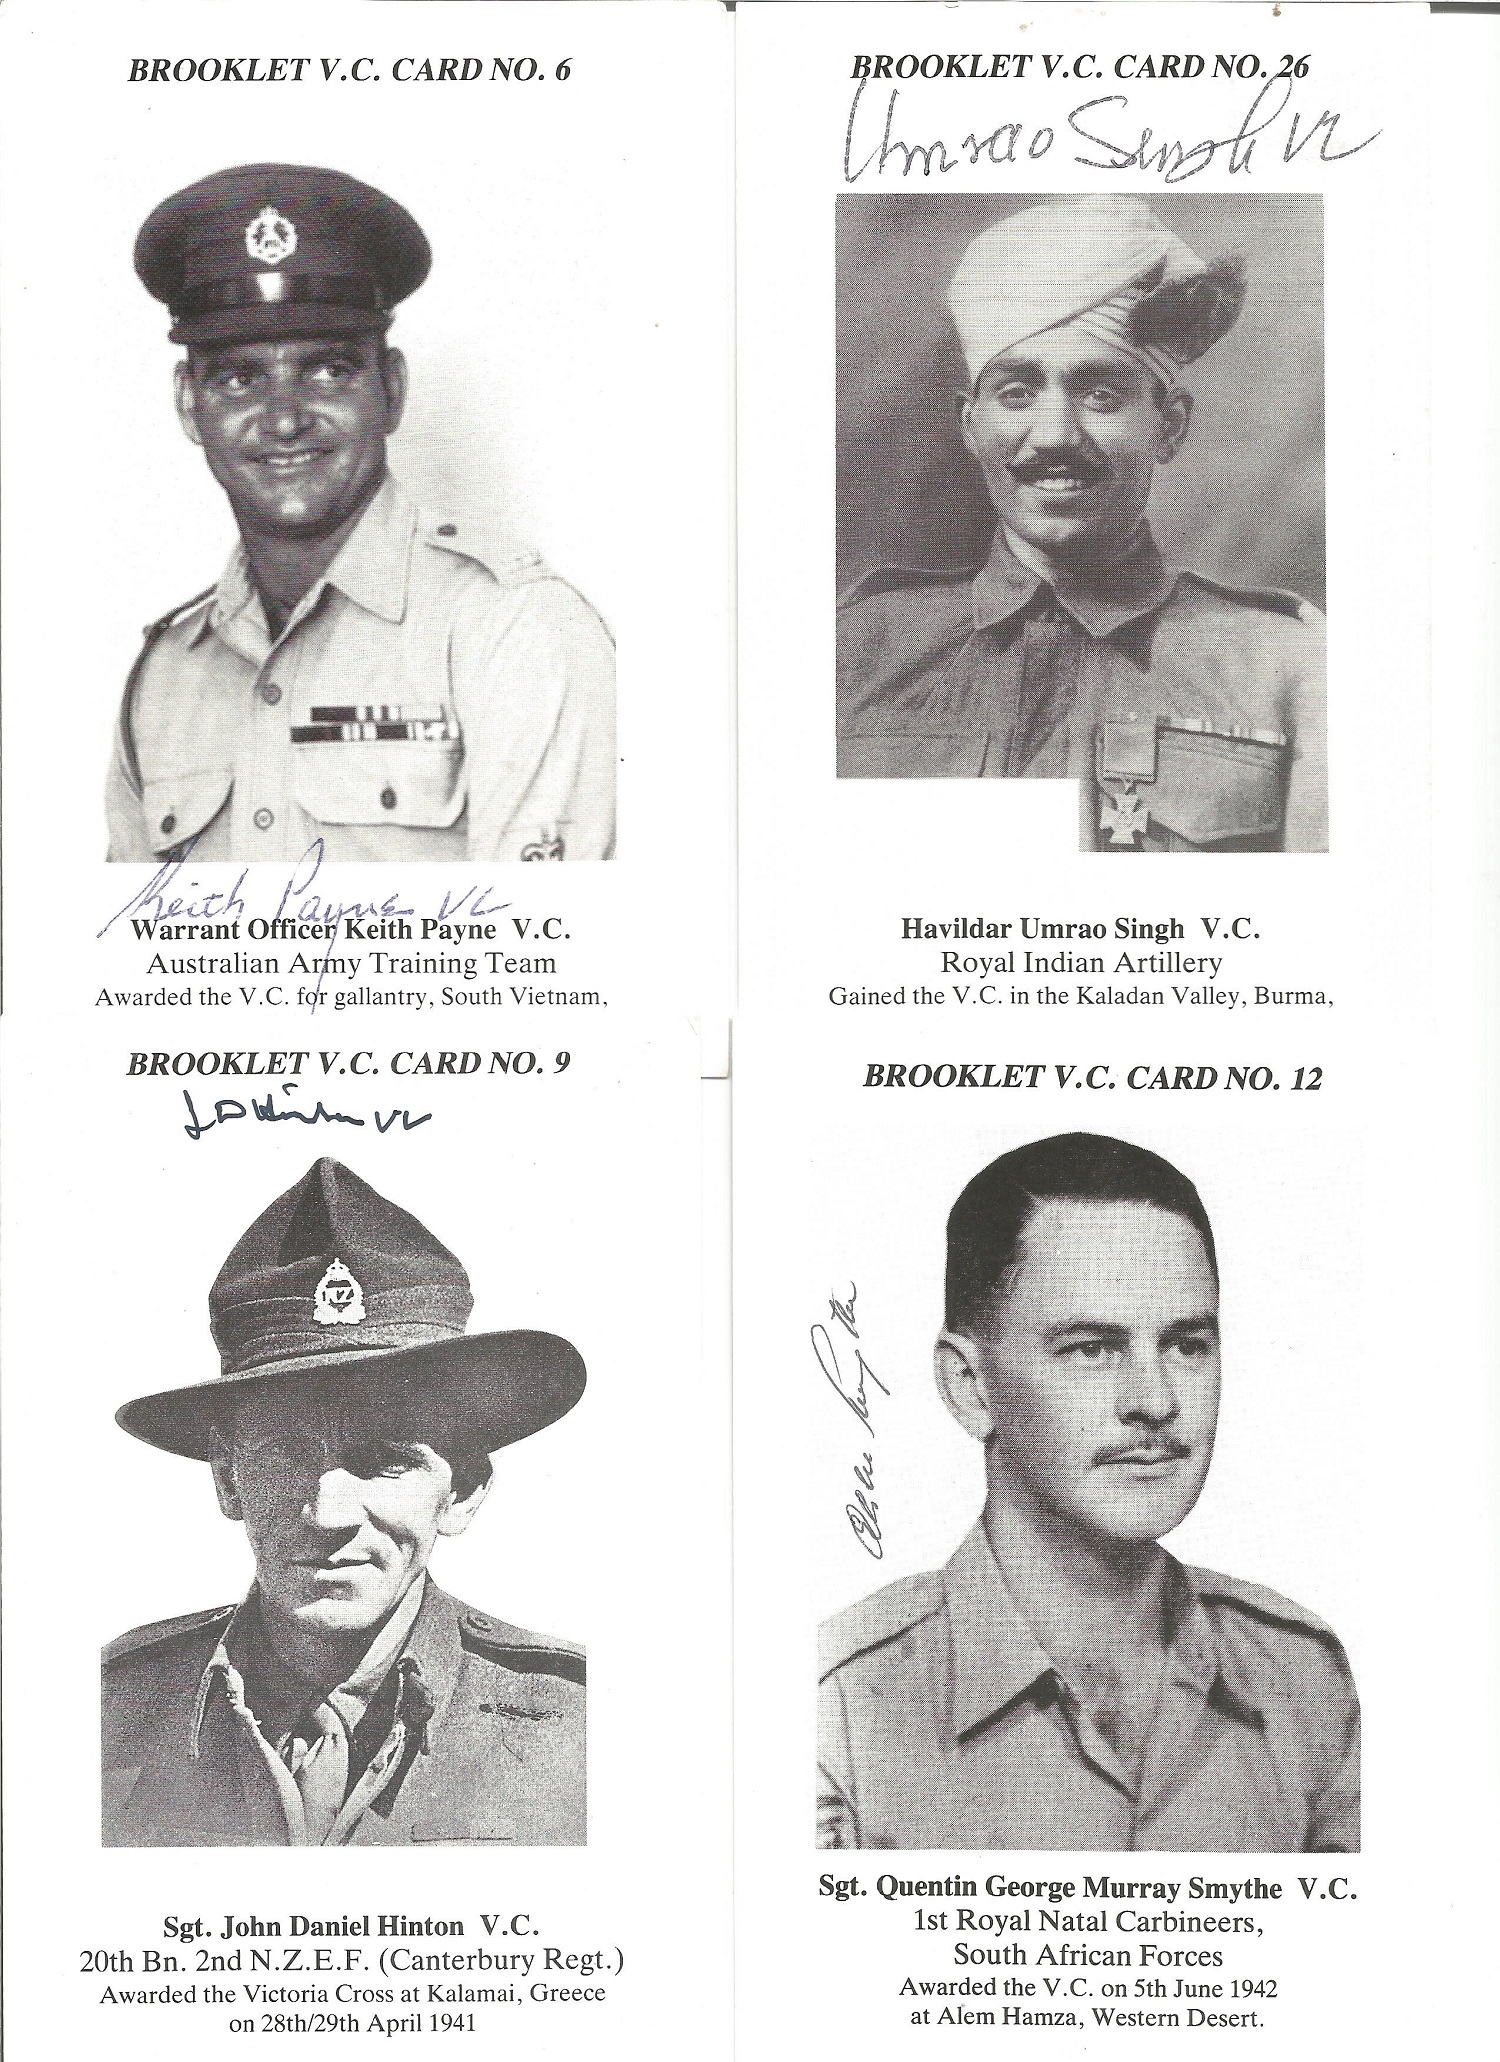 Victoria Cross Booklet card signed collection. Six 6 x 4 portrait cards with images and titles